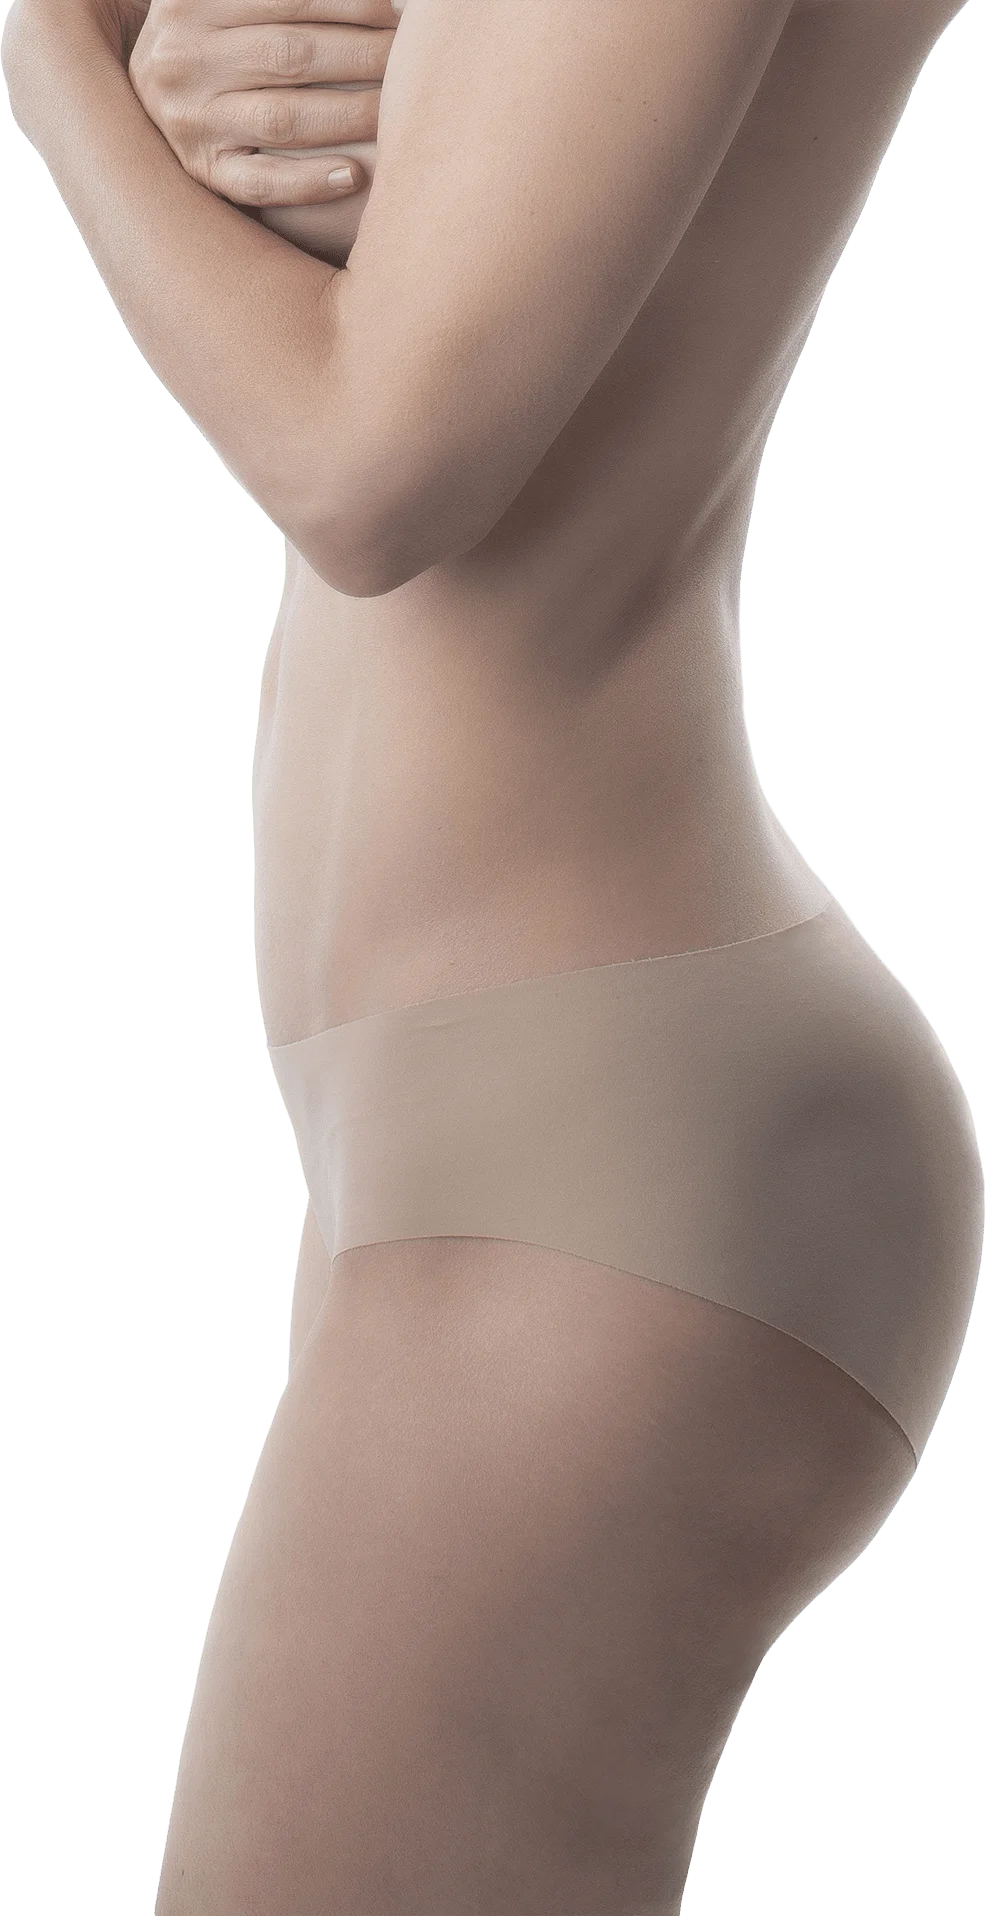 What is the Best Body Contouring Treatment? SmartLipo or CoolSculpting